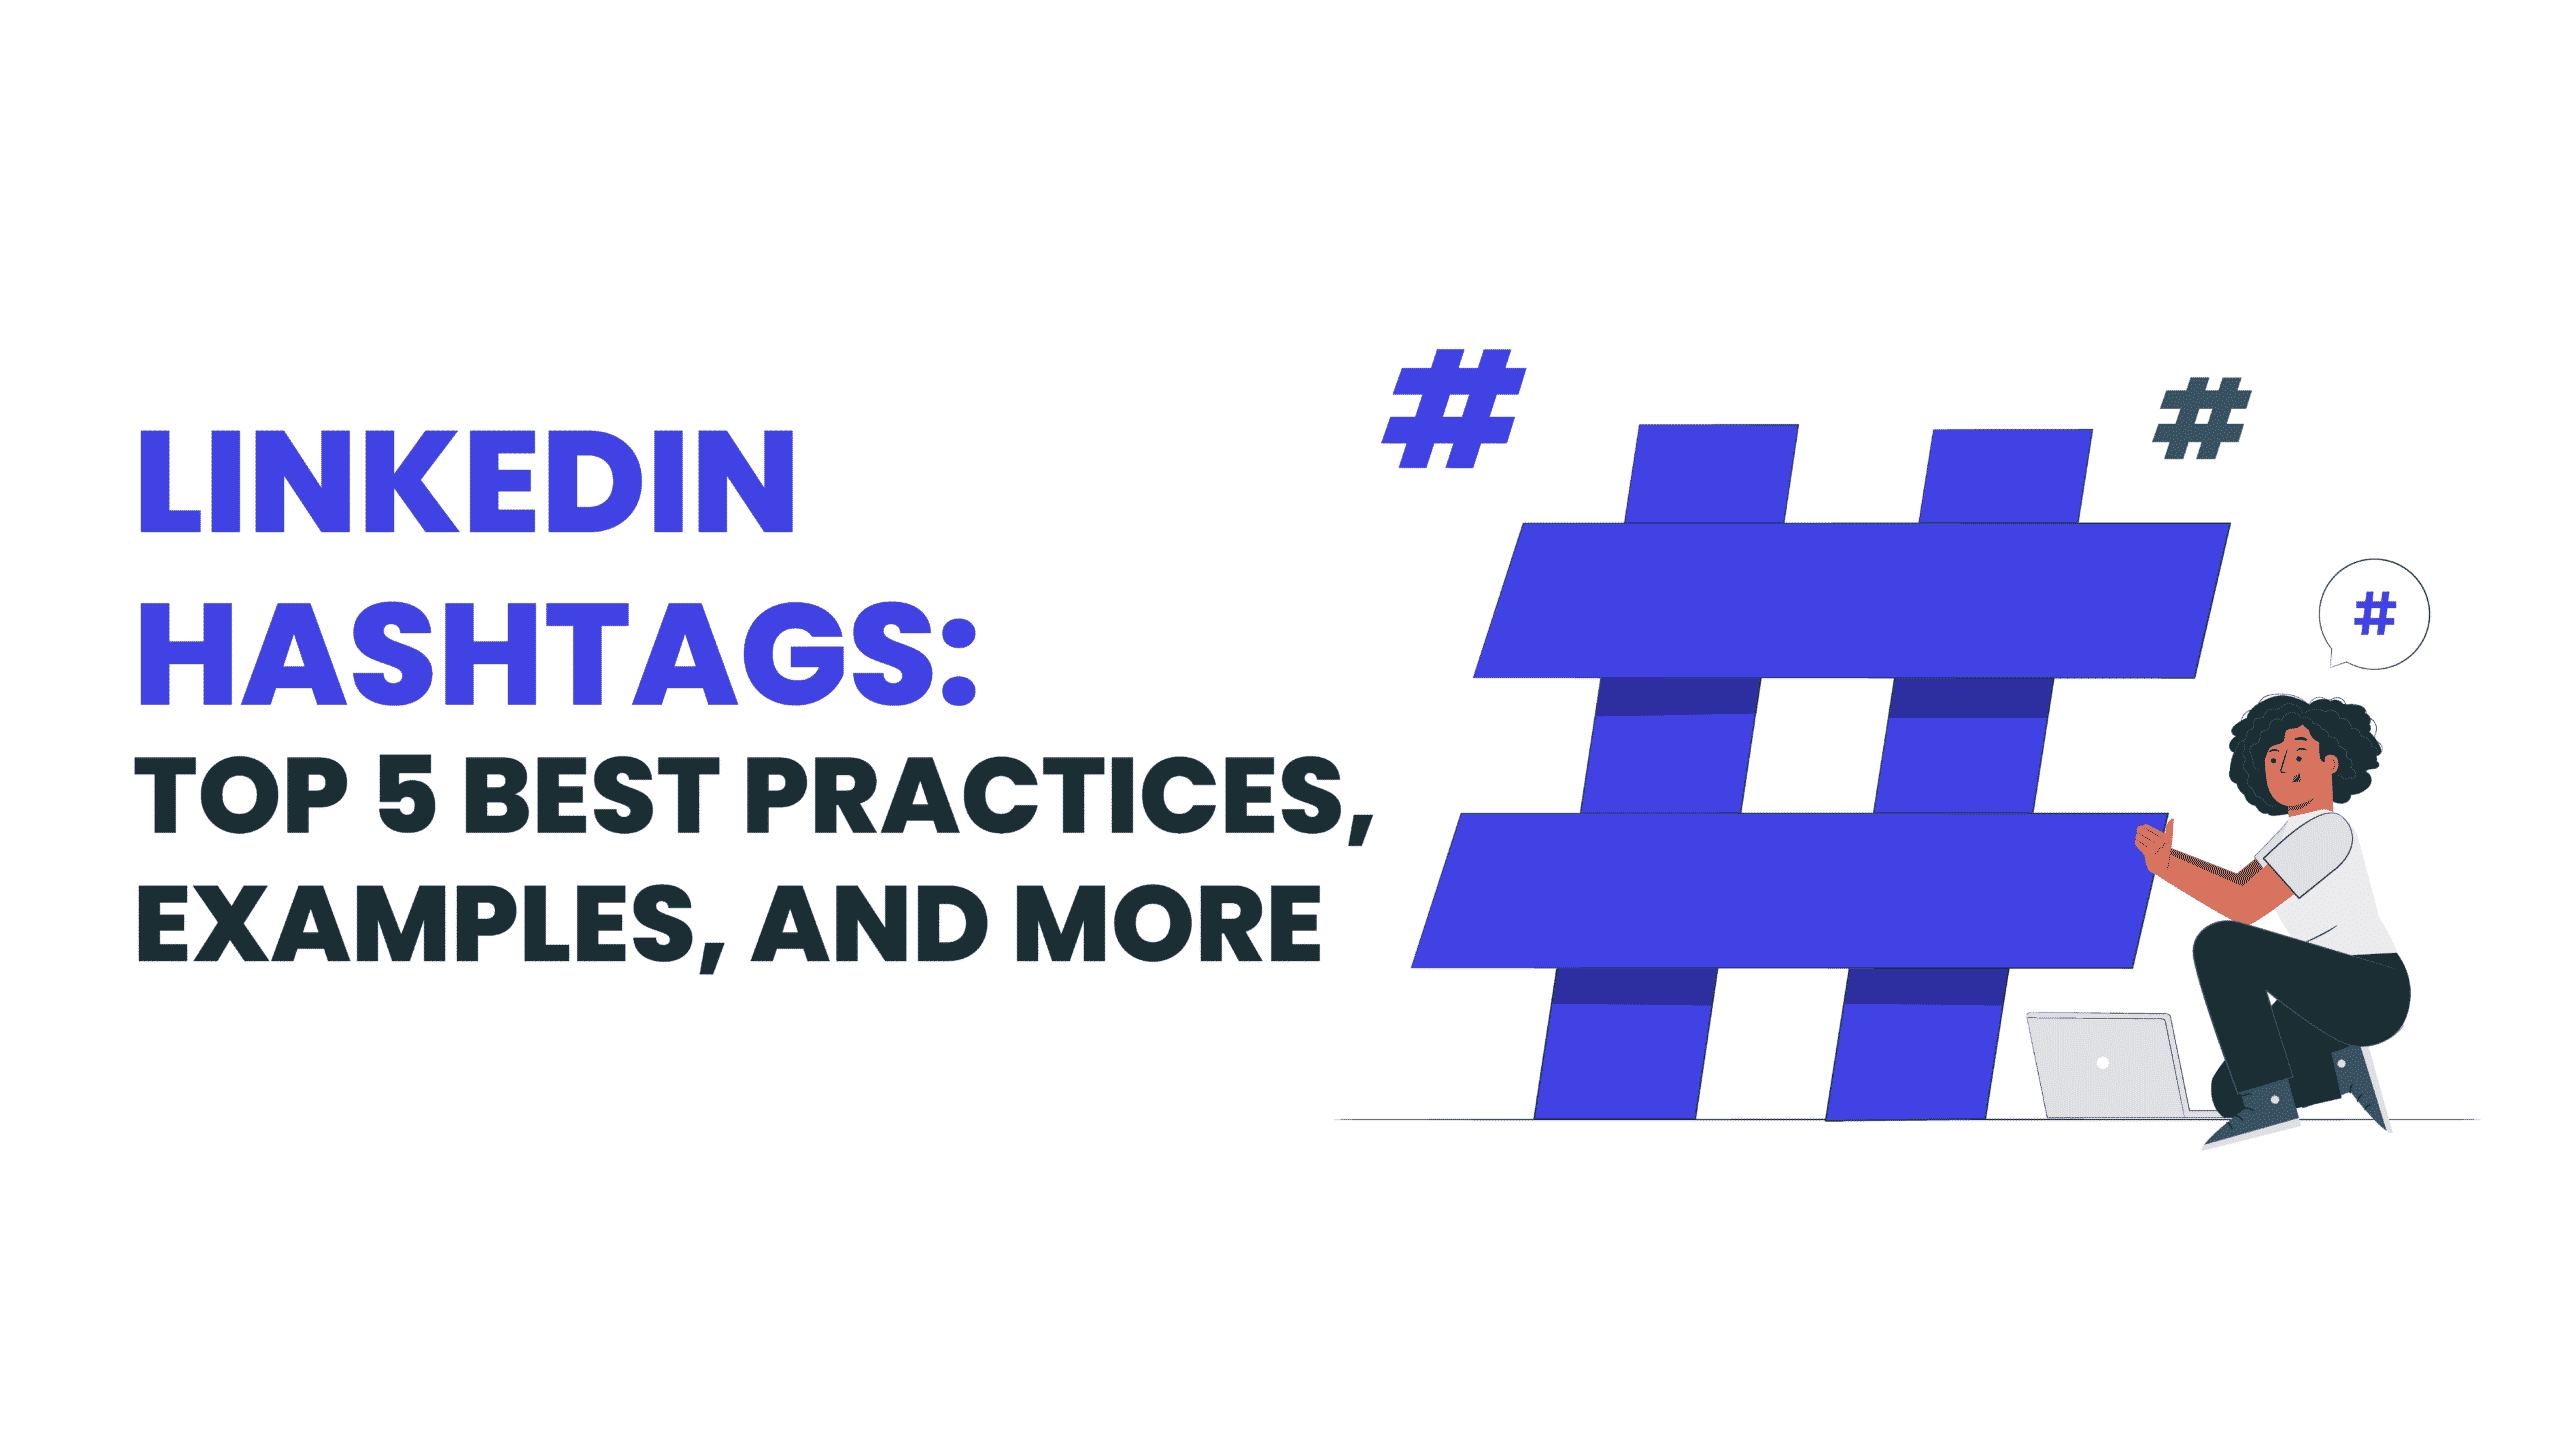 Top 5 LinkedIn Hashtag Practices, Examples and More Expandi Expandi